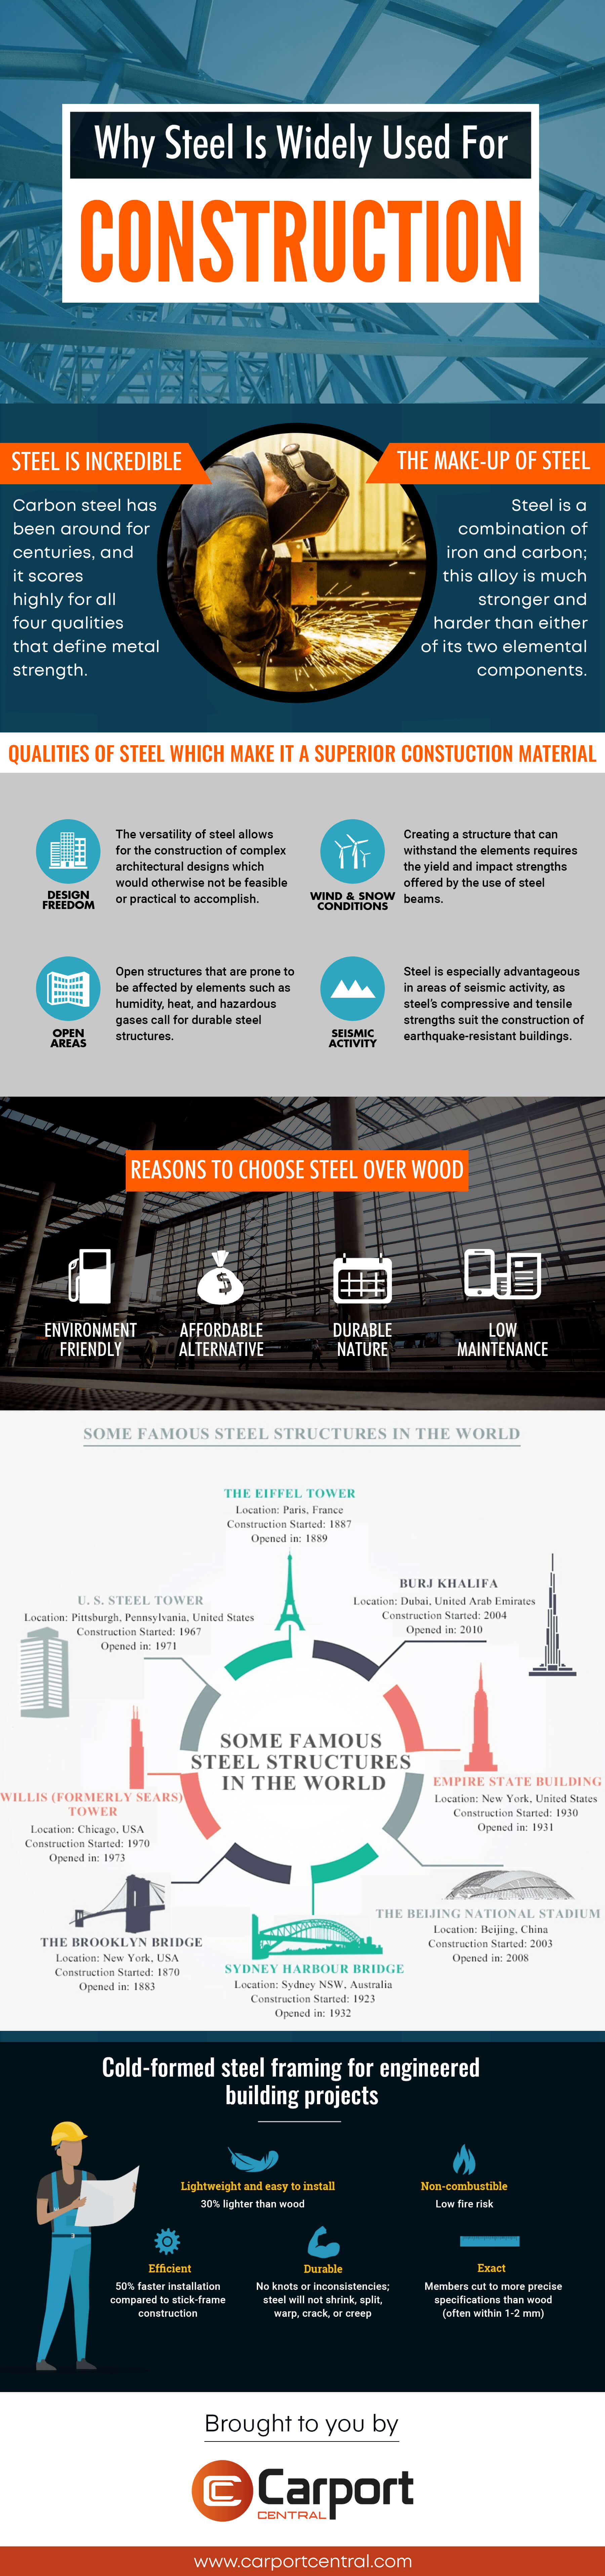 Why Steel is Widely Used for Construction